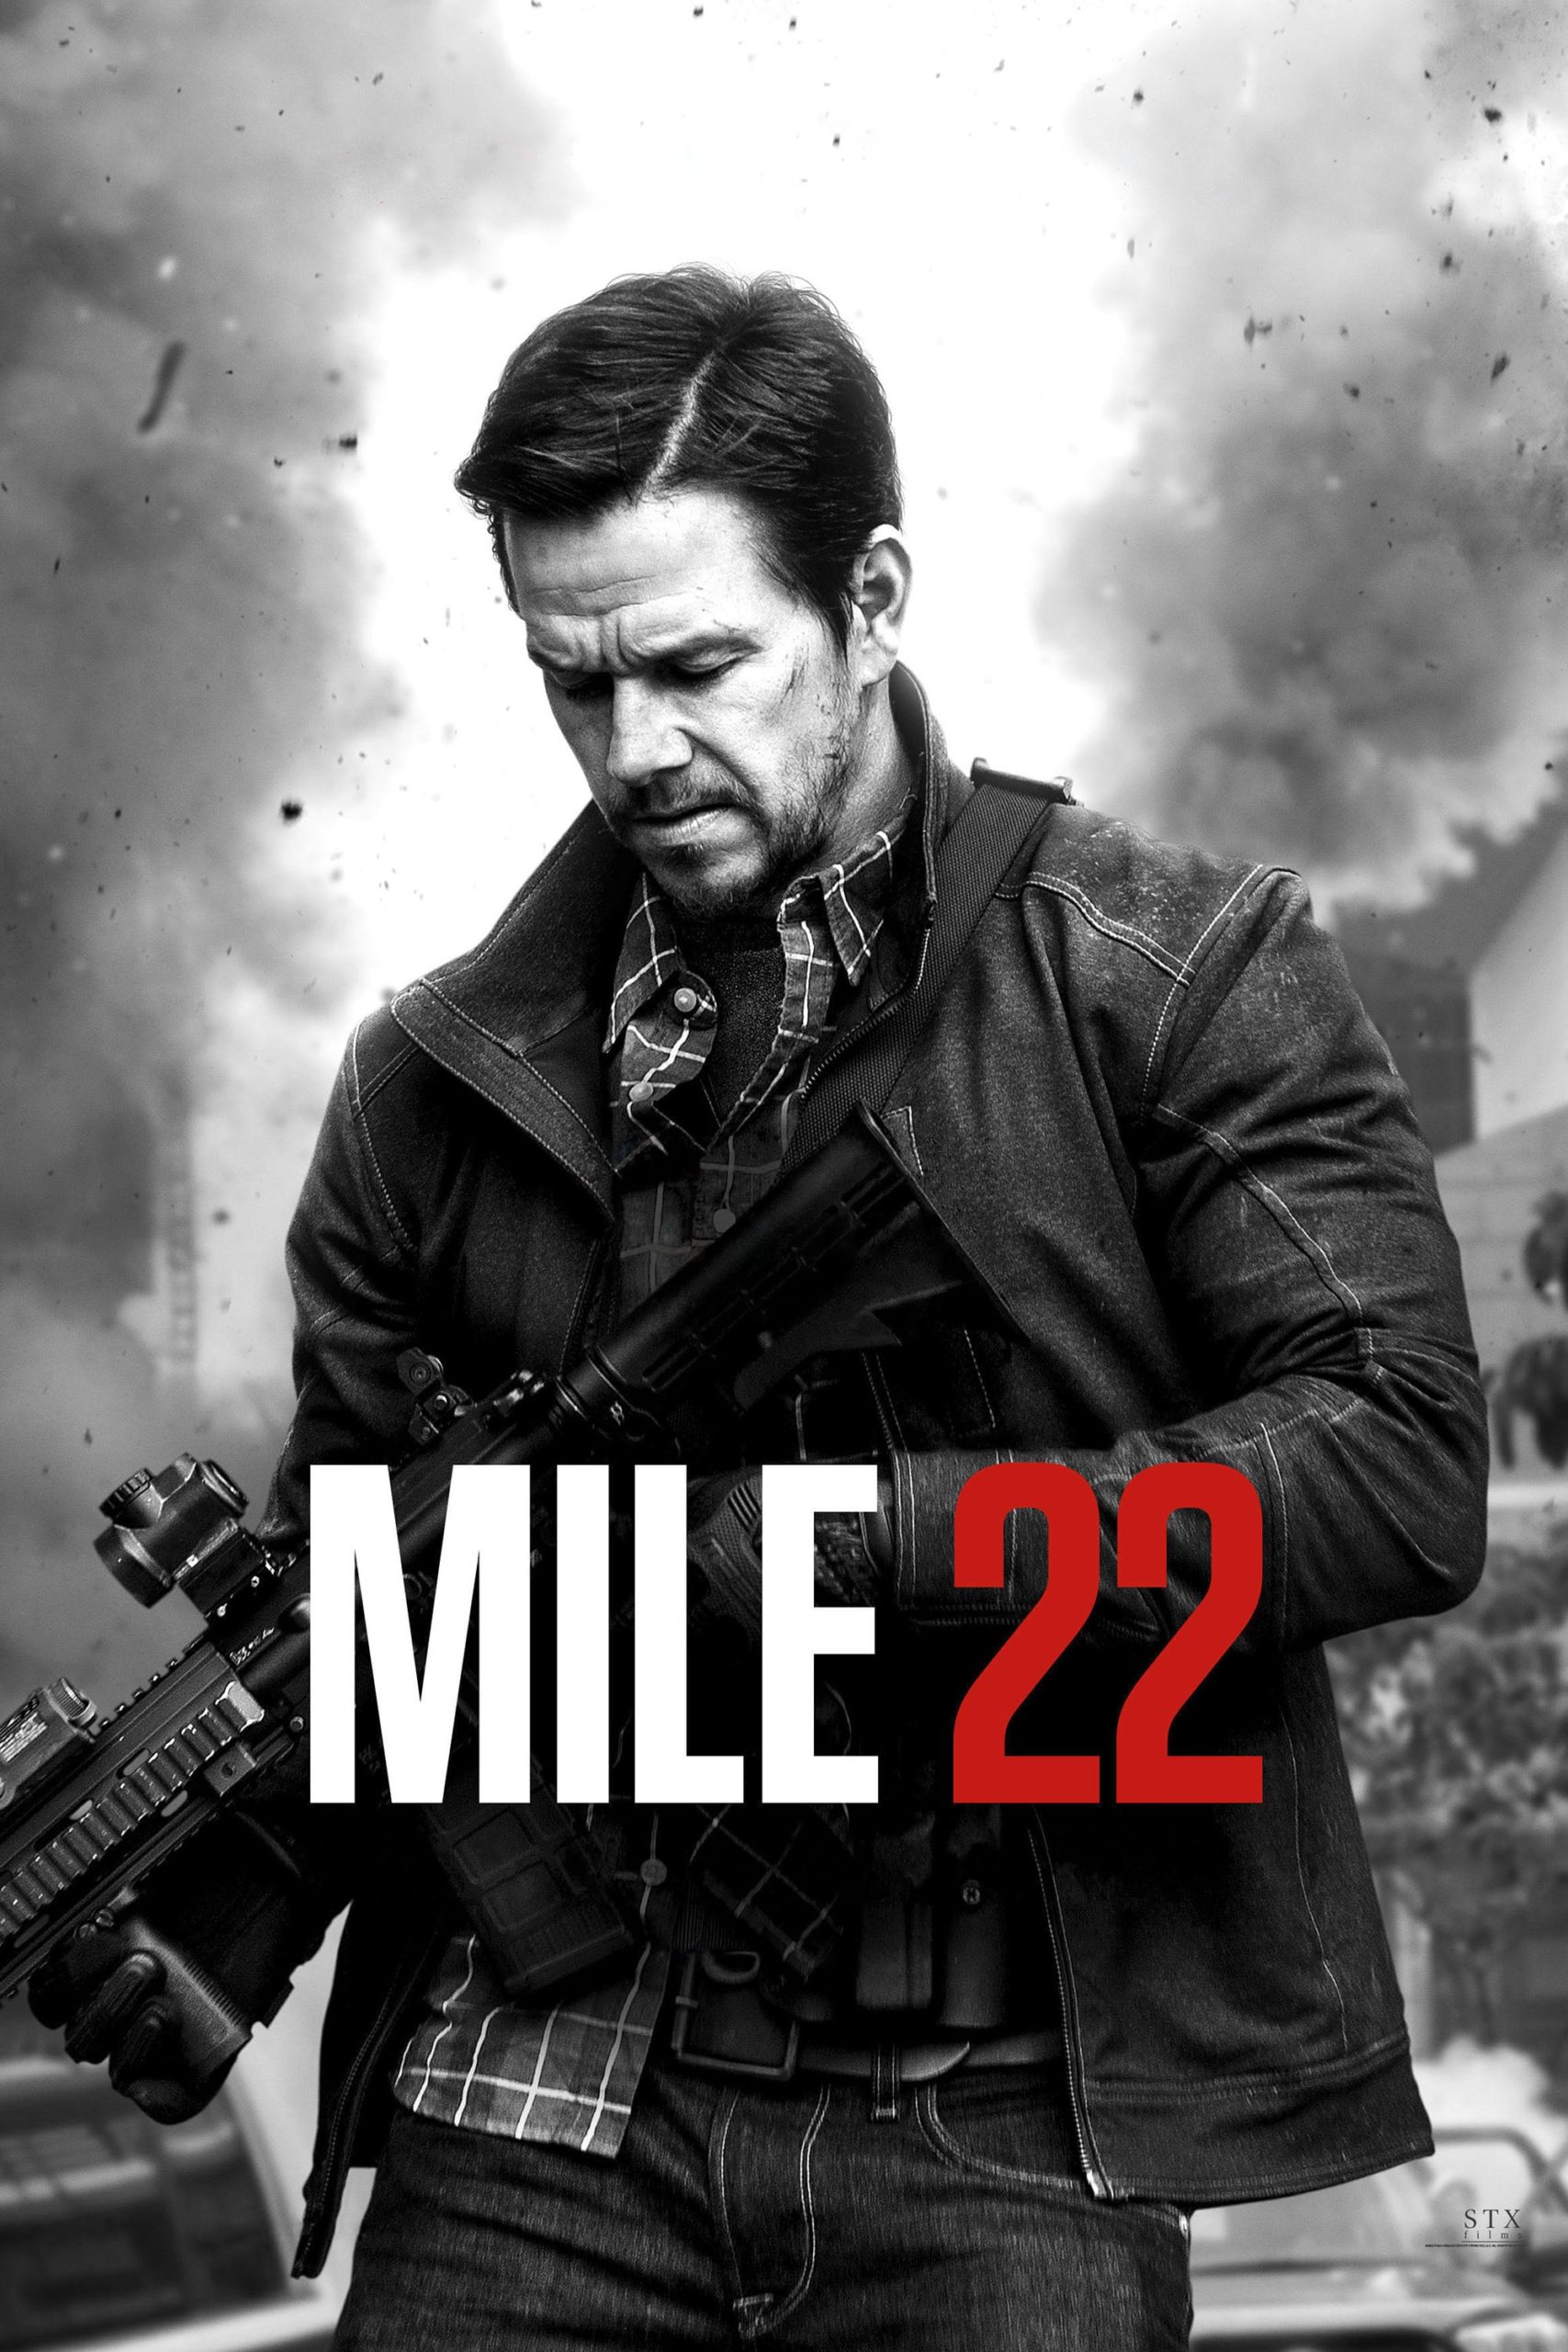 Poster for the movie "Mile 22"